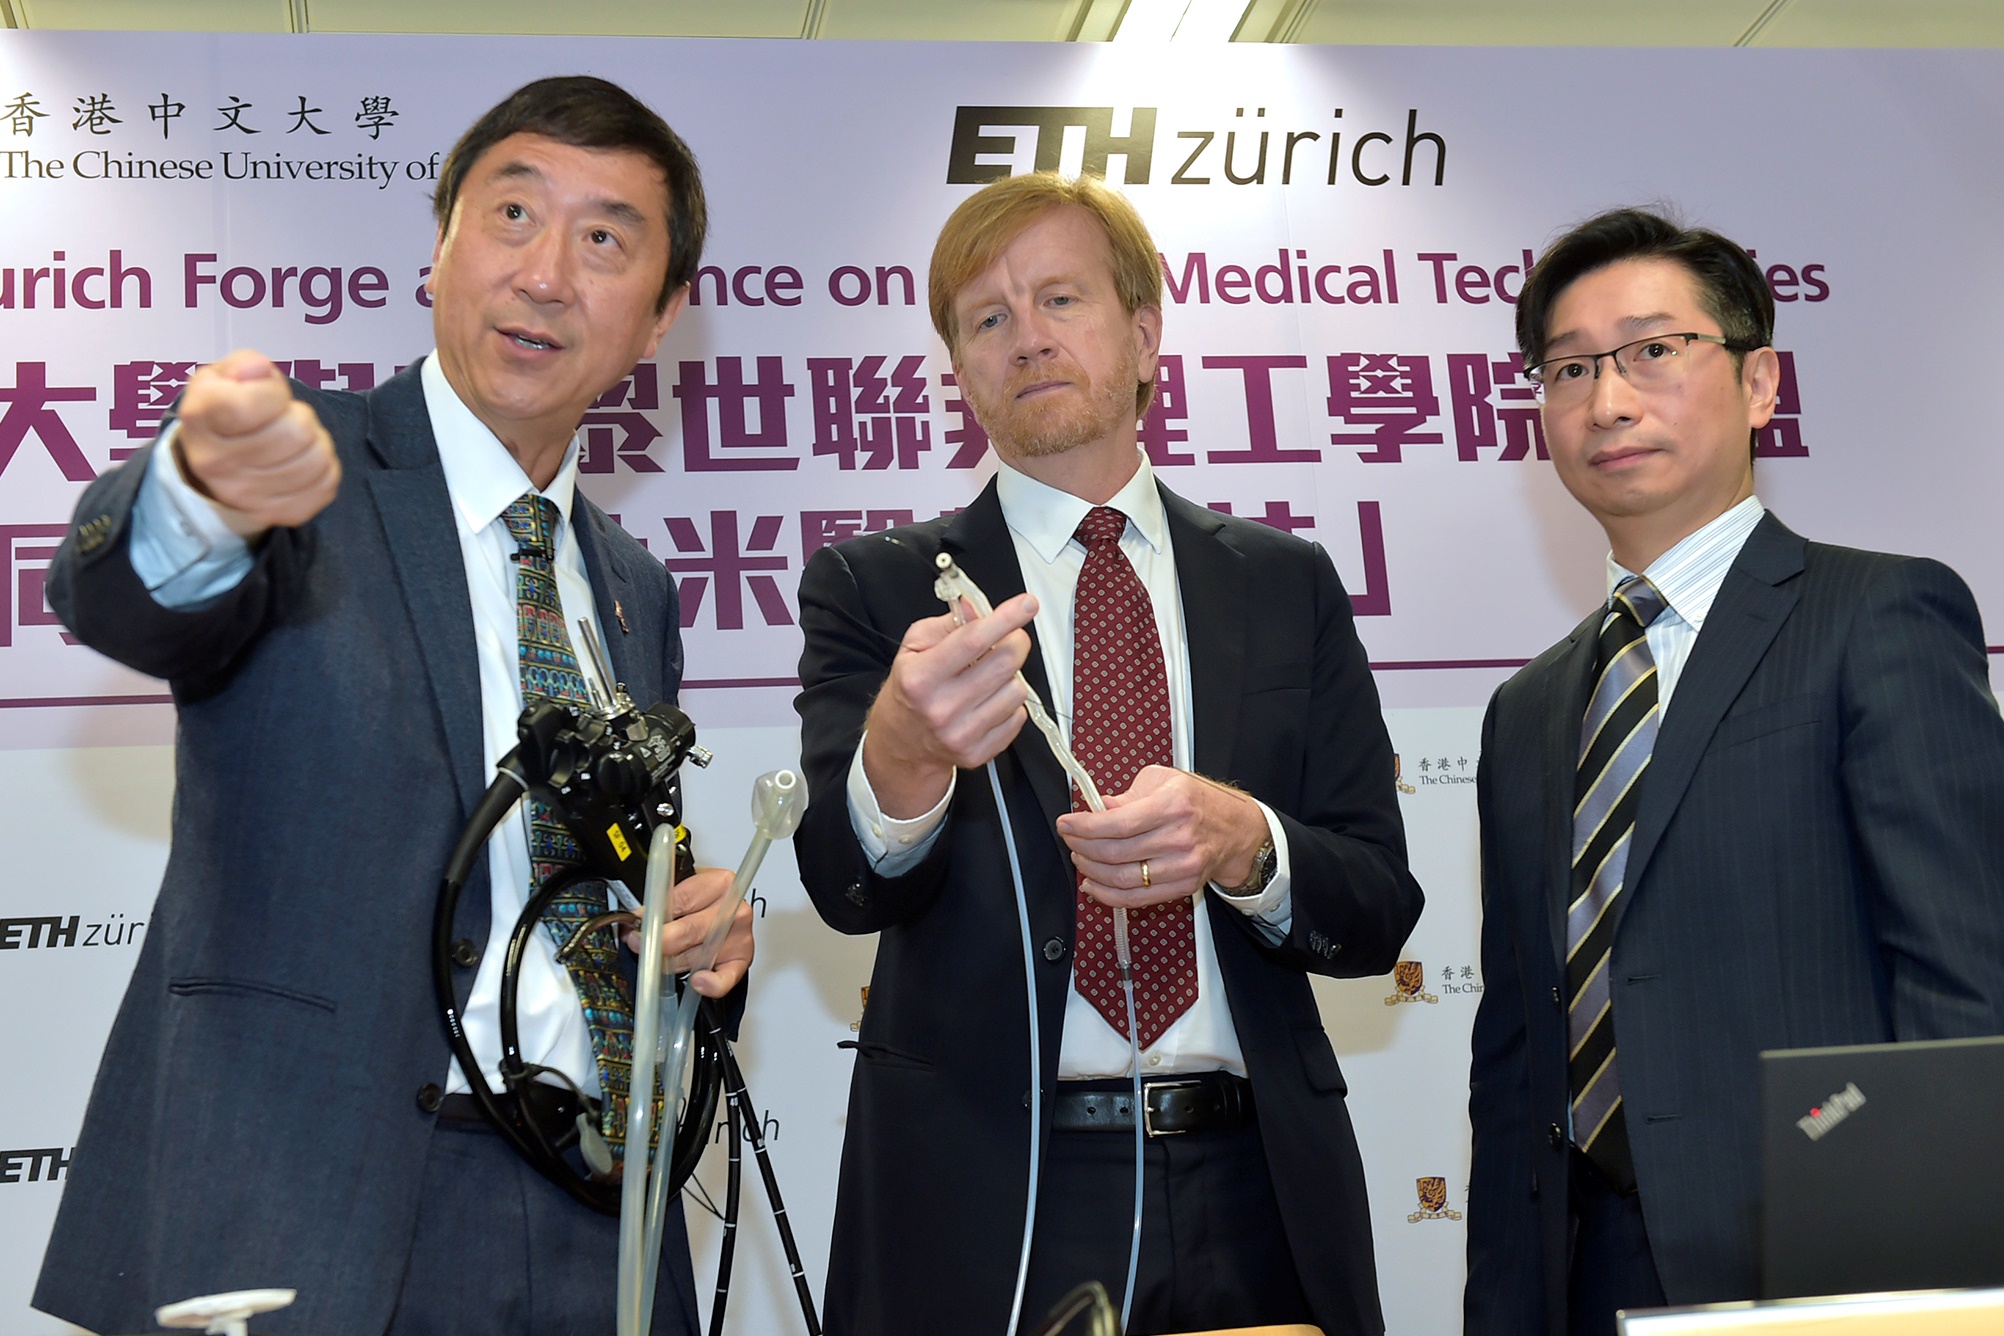 Prof. Joseph SUNG (Left) points out that the conventional endoscopes are not flexible enough to travel along the small bowel intestine, while the new magnetic guided endoscope is slimmer and more elastic. The magnetic driven device can conduct more precise check-up, save half of the procedural time and reduce discomfort caused to patients.